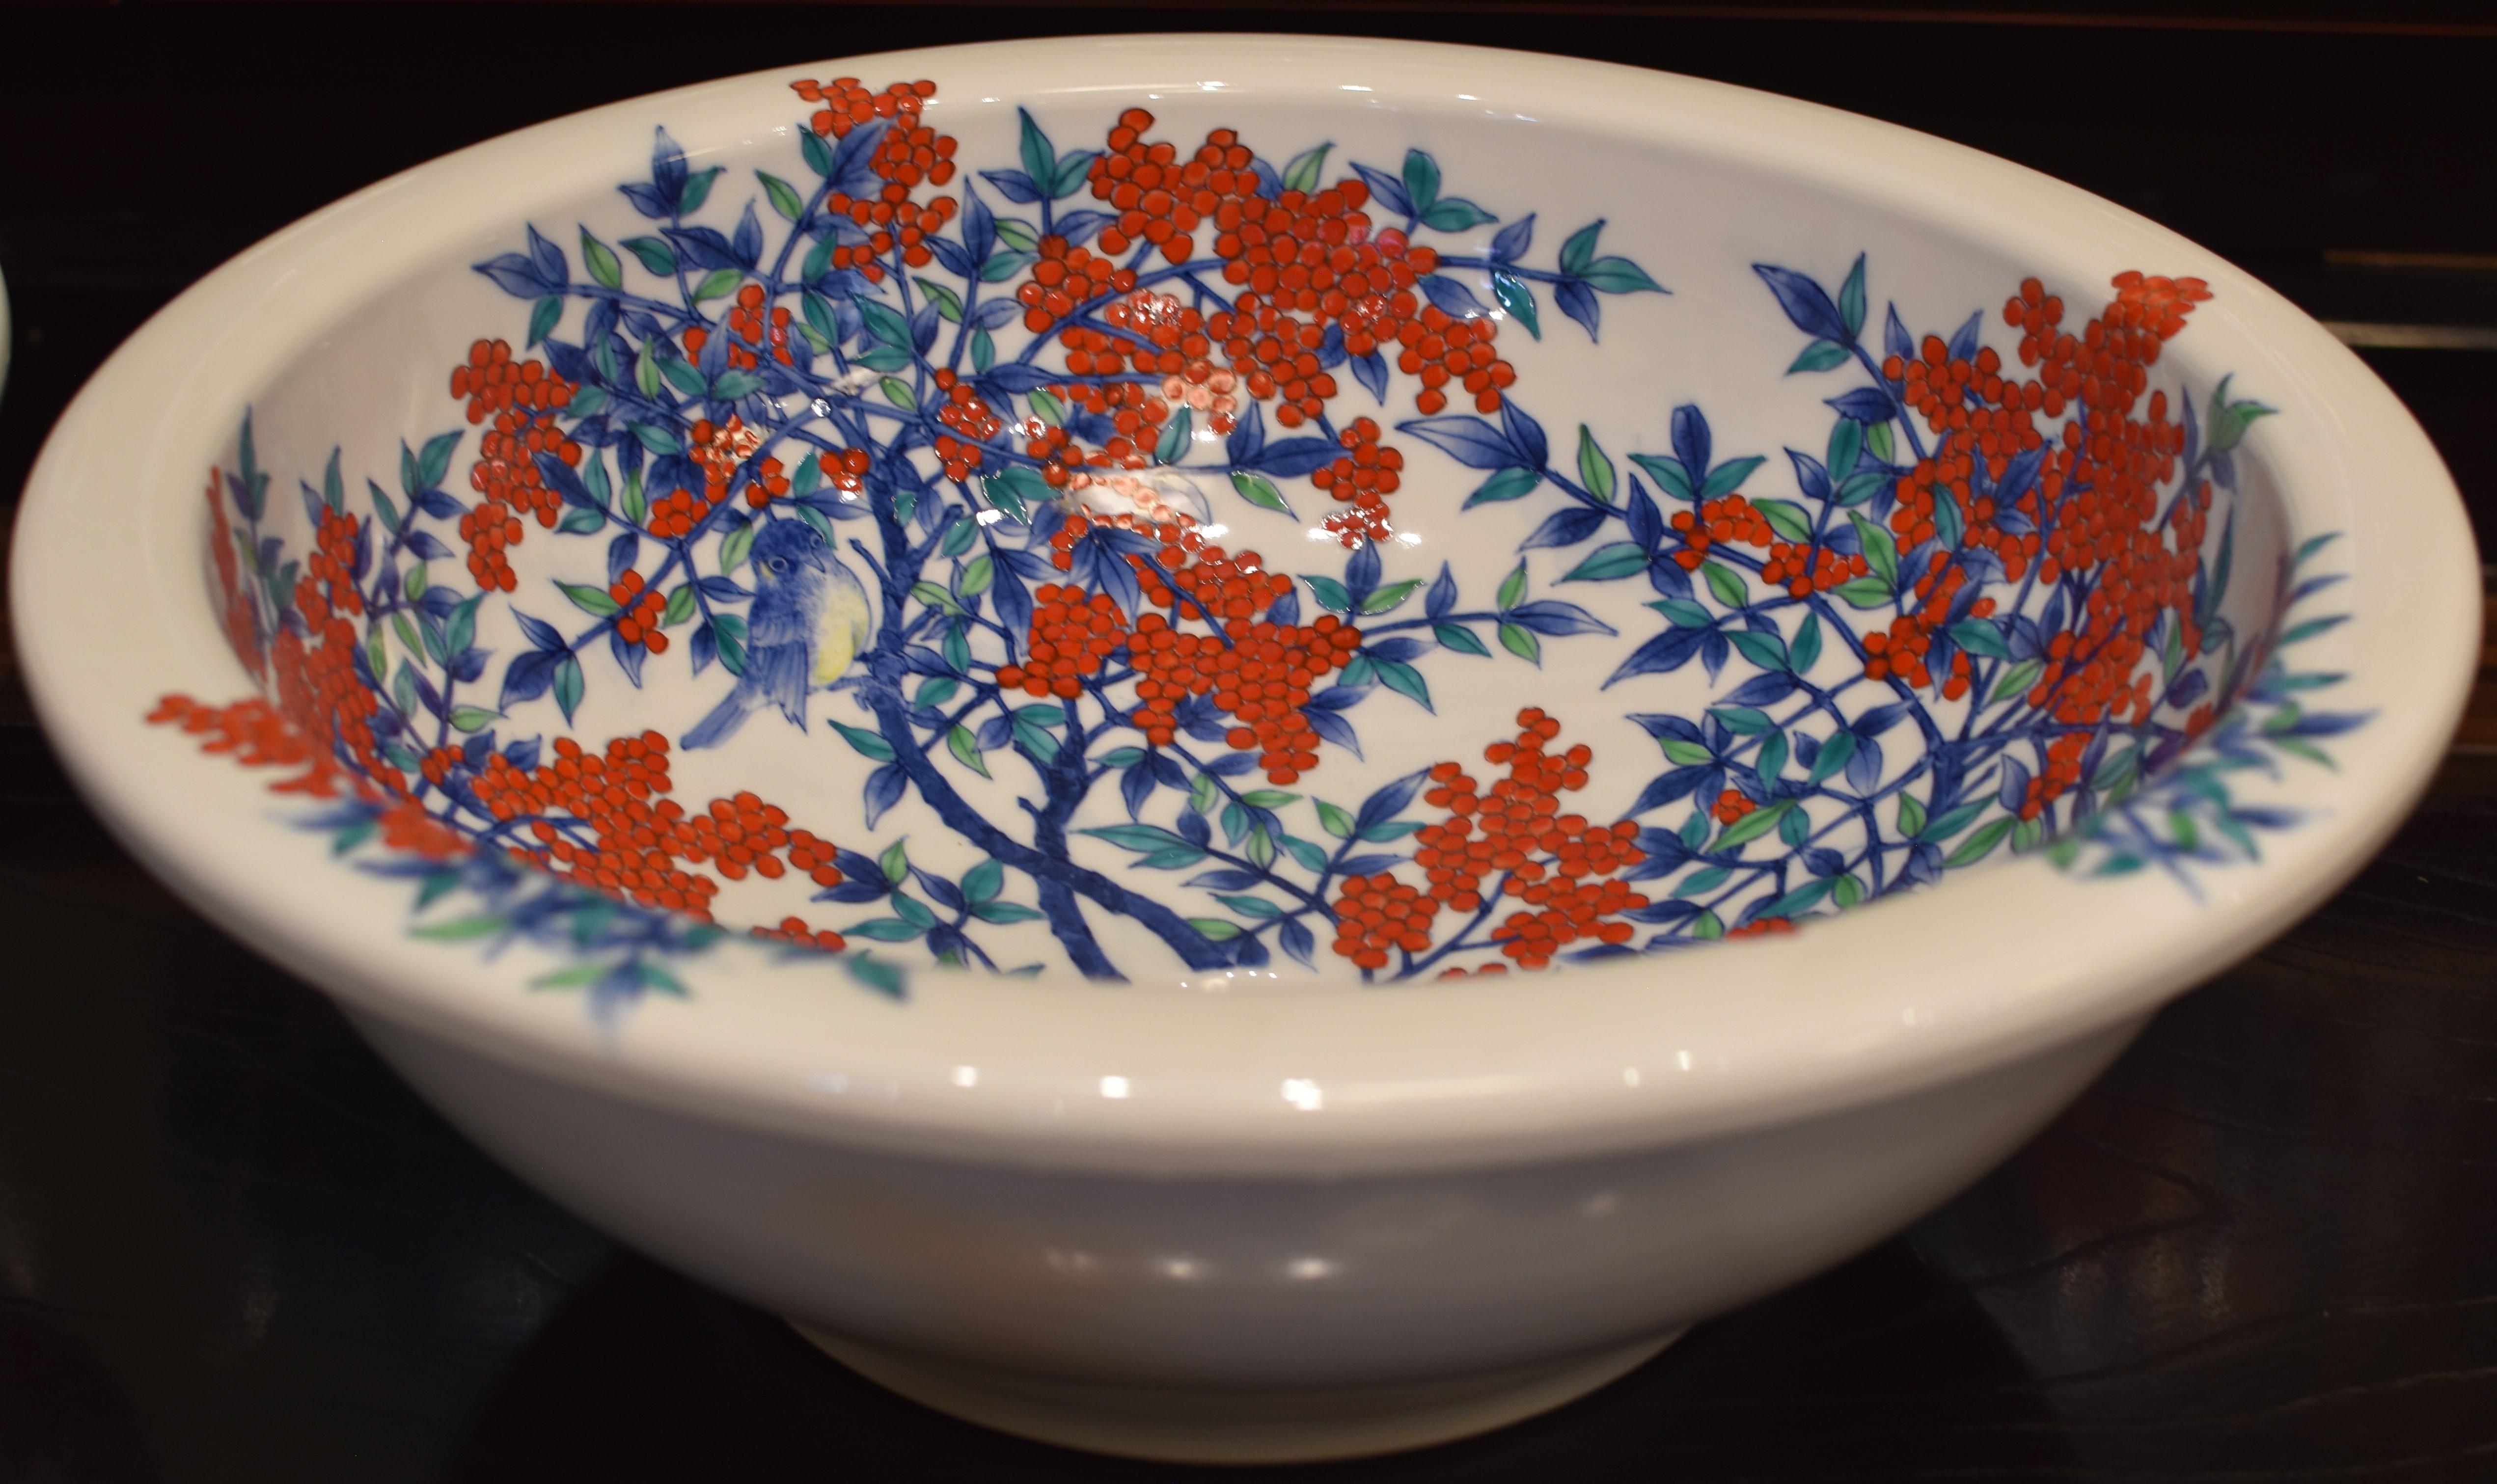 Contemporary Hand-Painted Porcelain Washbasin by Japanese Master Artist 8